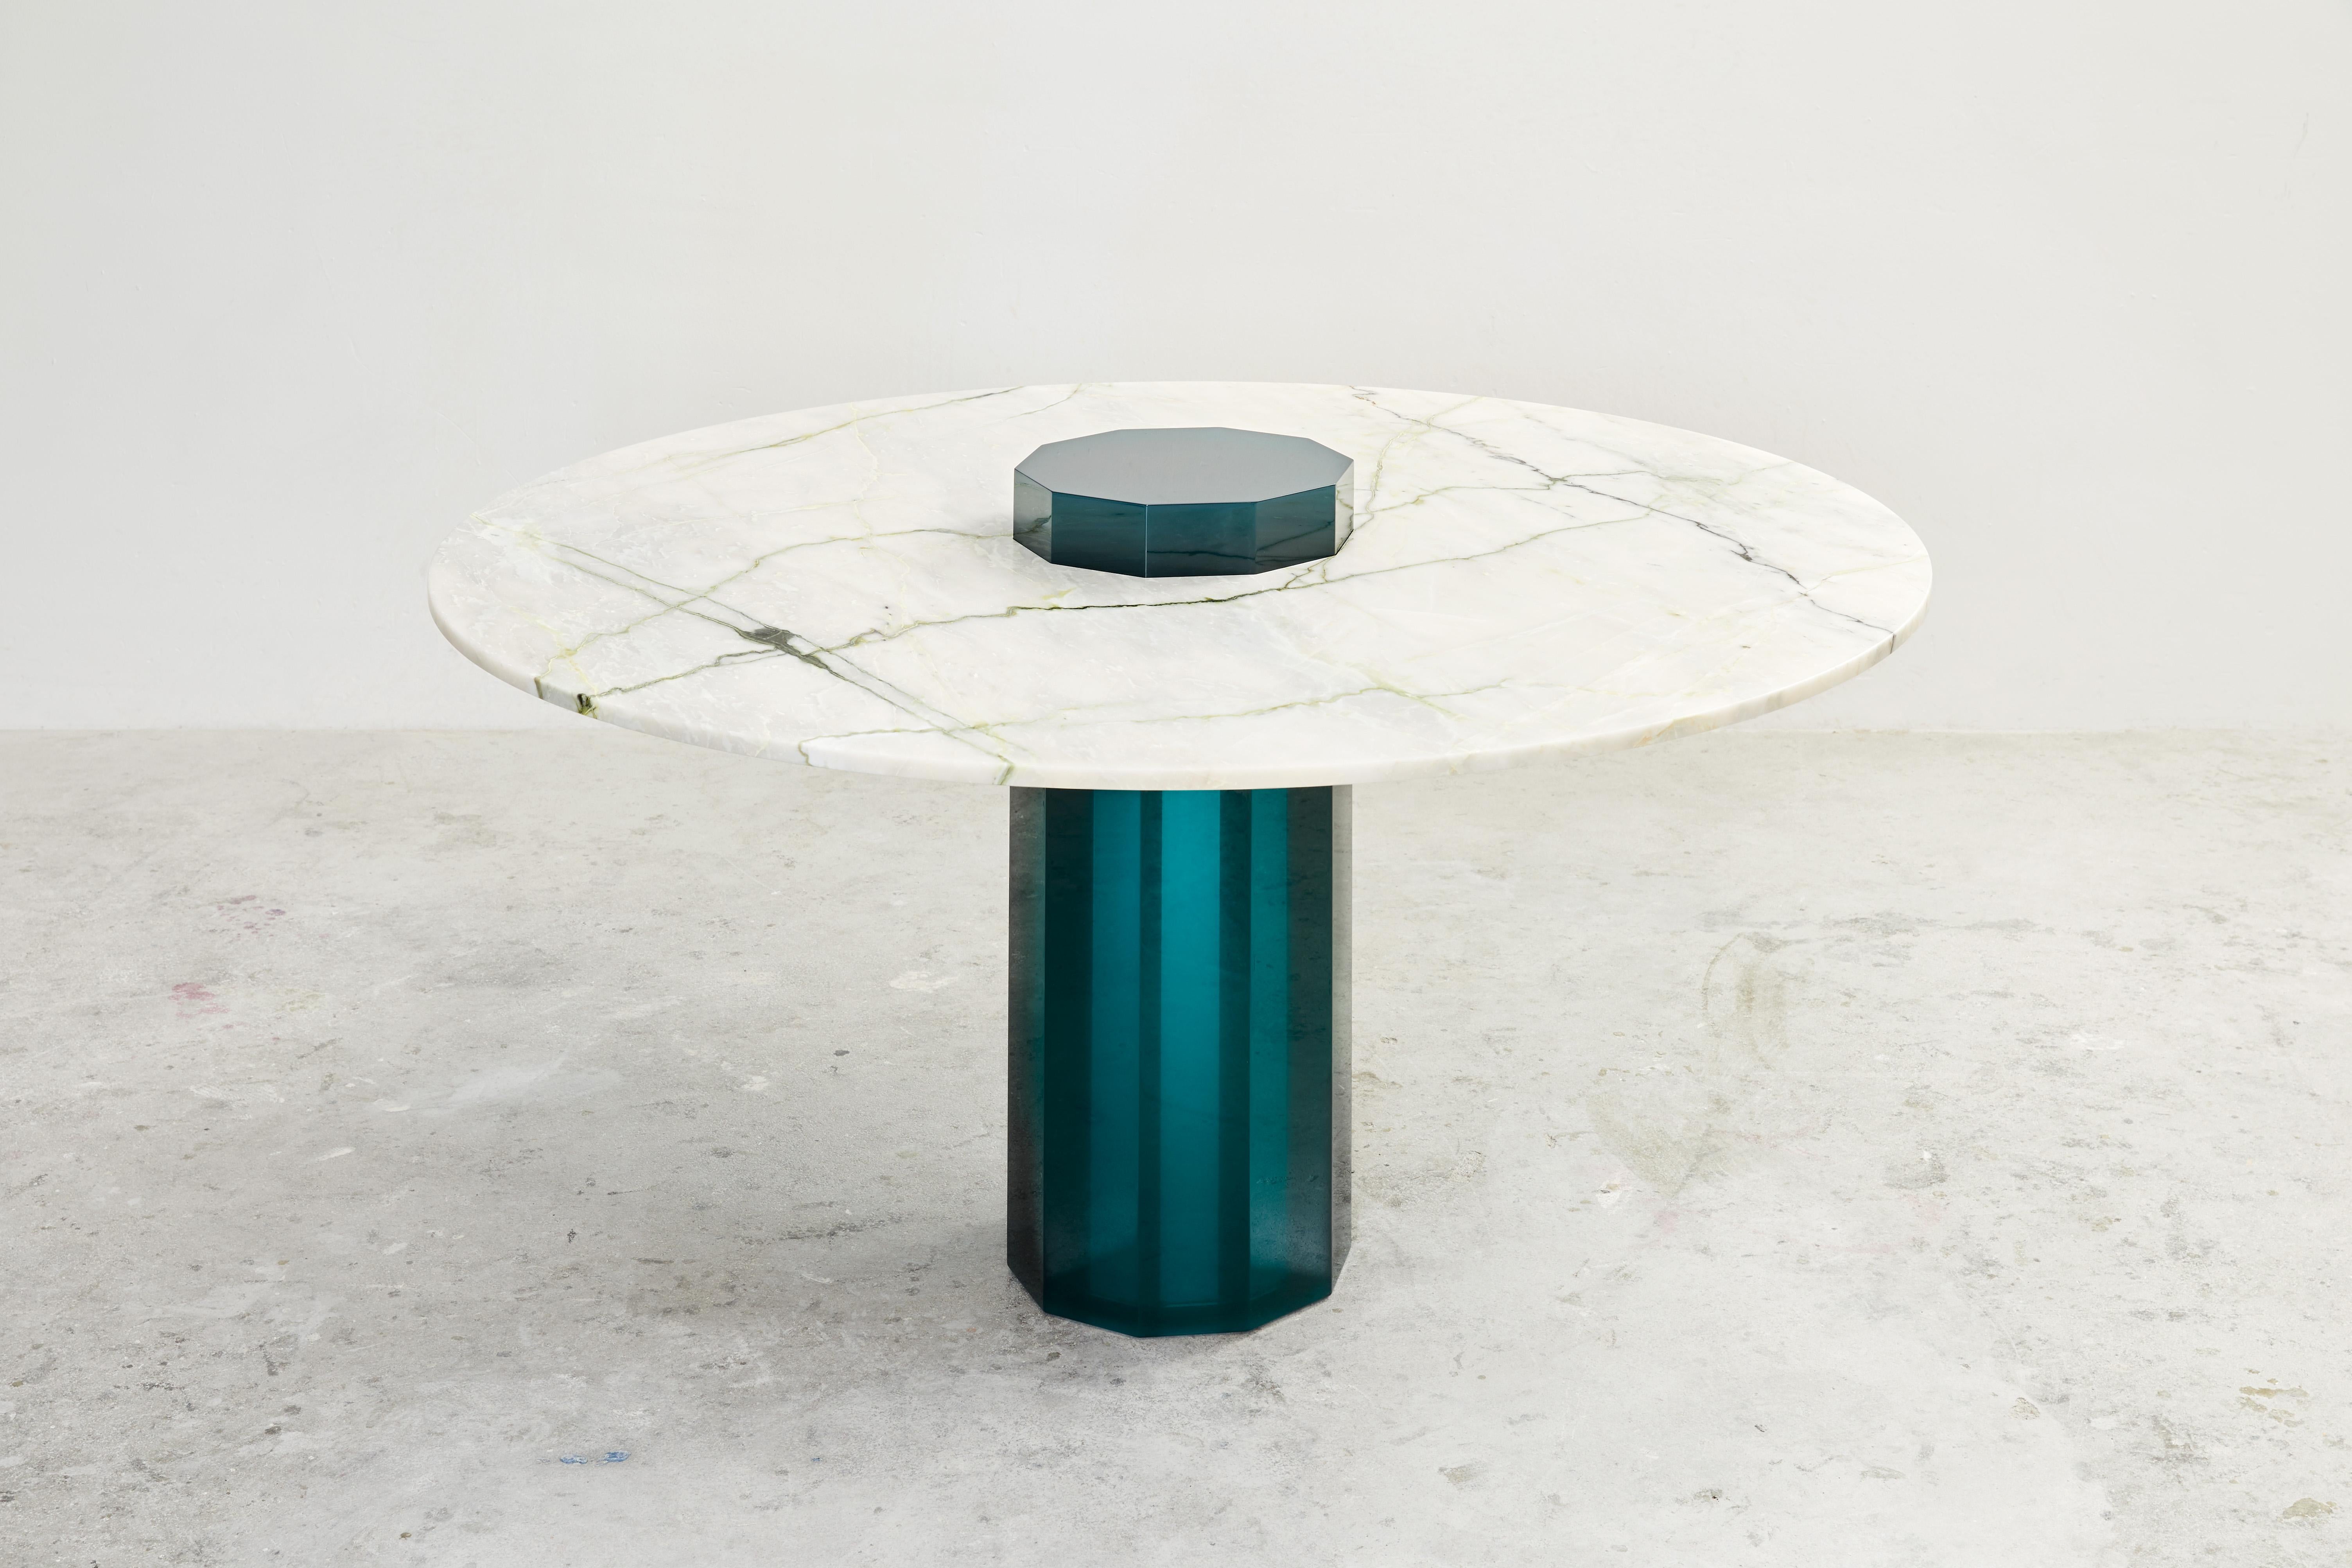 Pilastro dining table by Cobra Studios
Dimensions: 150 x 75 cm
Materials: Resin, Finish 
Tabletop: Marble Lillac.

Finish tabletop: Travertine available
 
SOLIDS Collection 
The solids collection is a family of dinner tables, coffee tables,